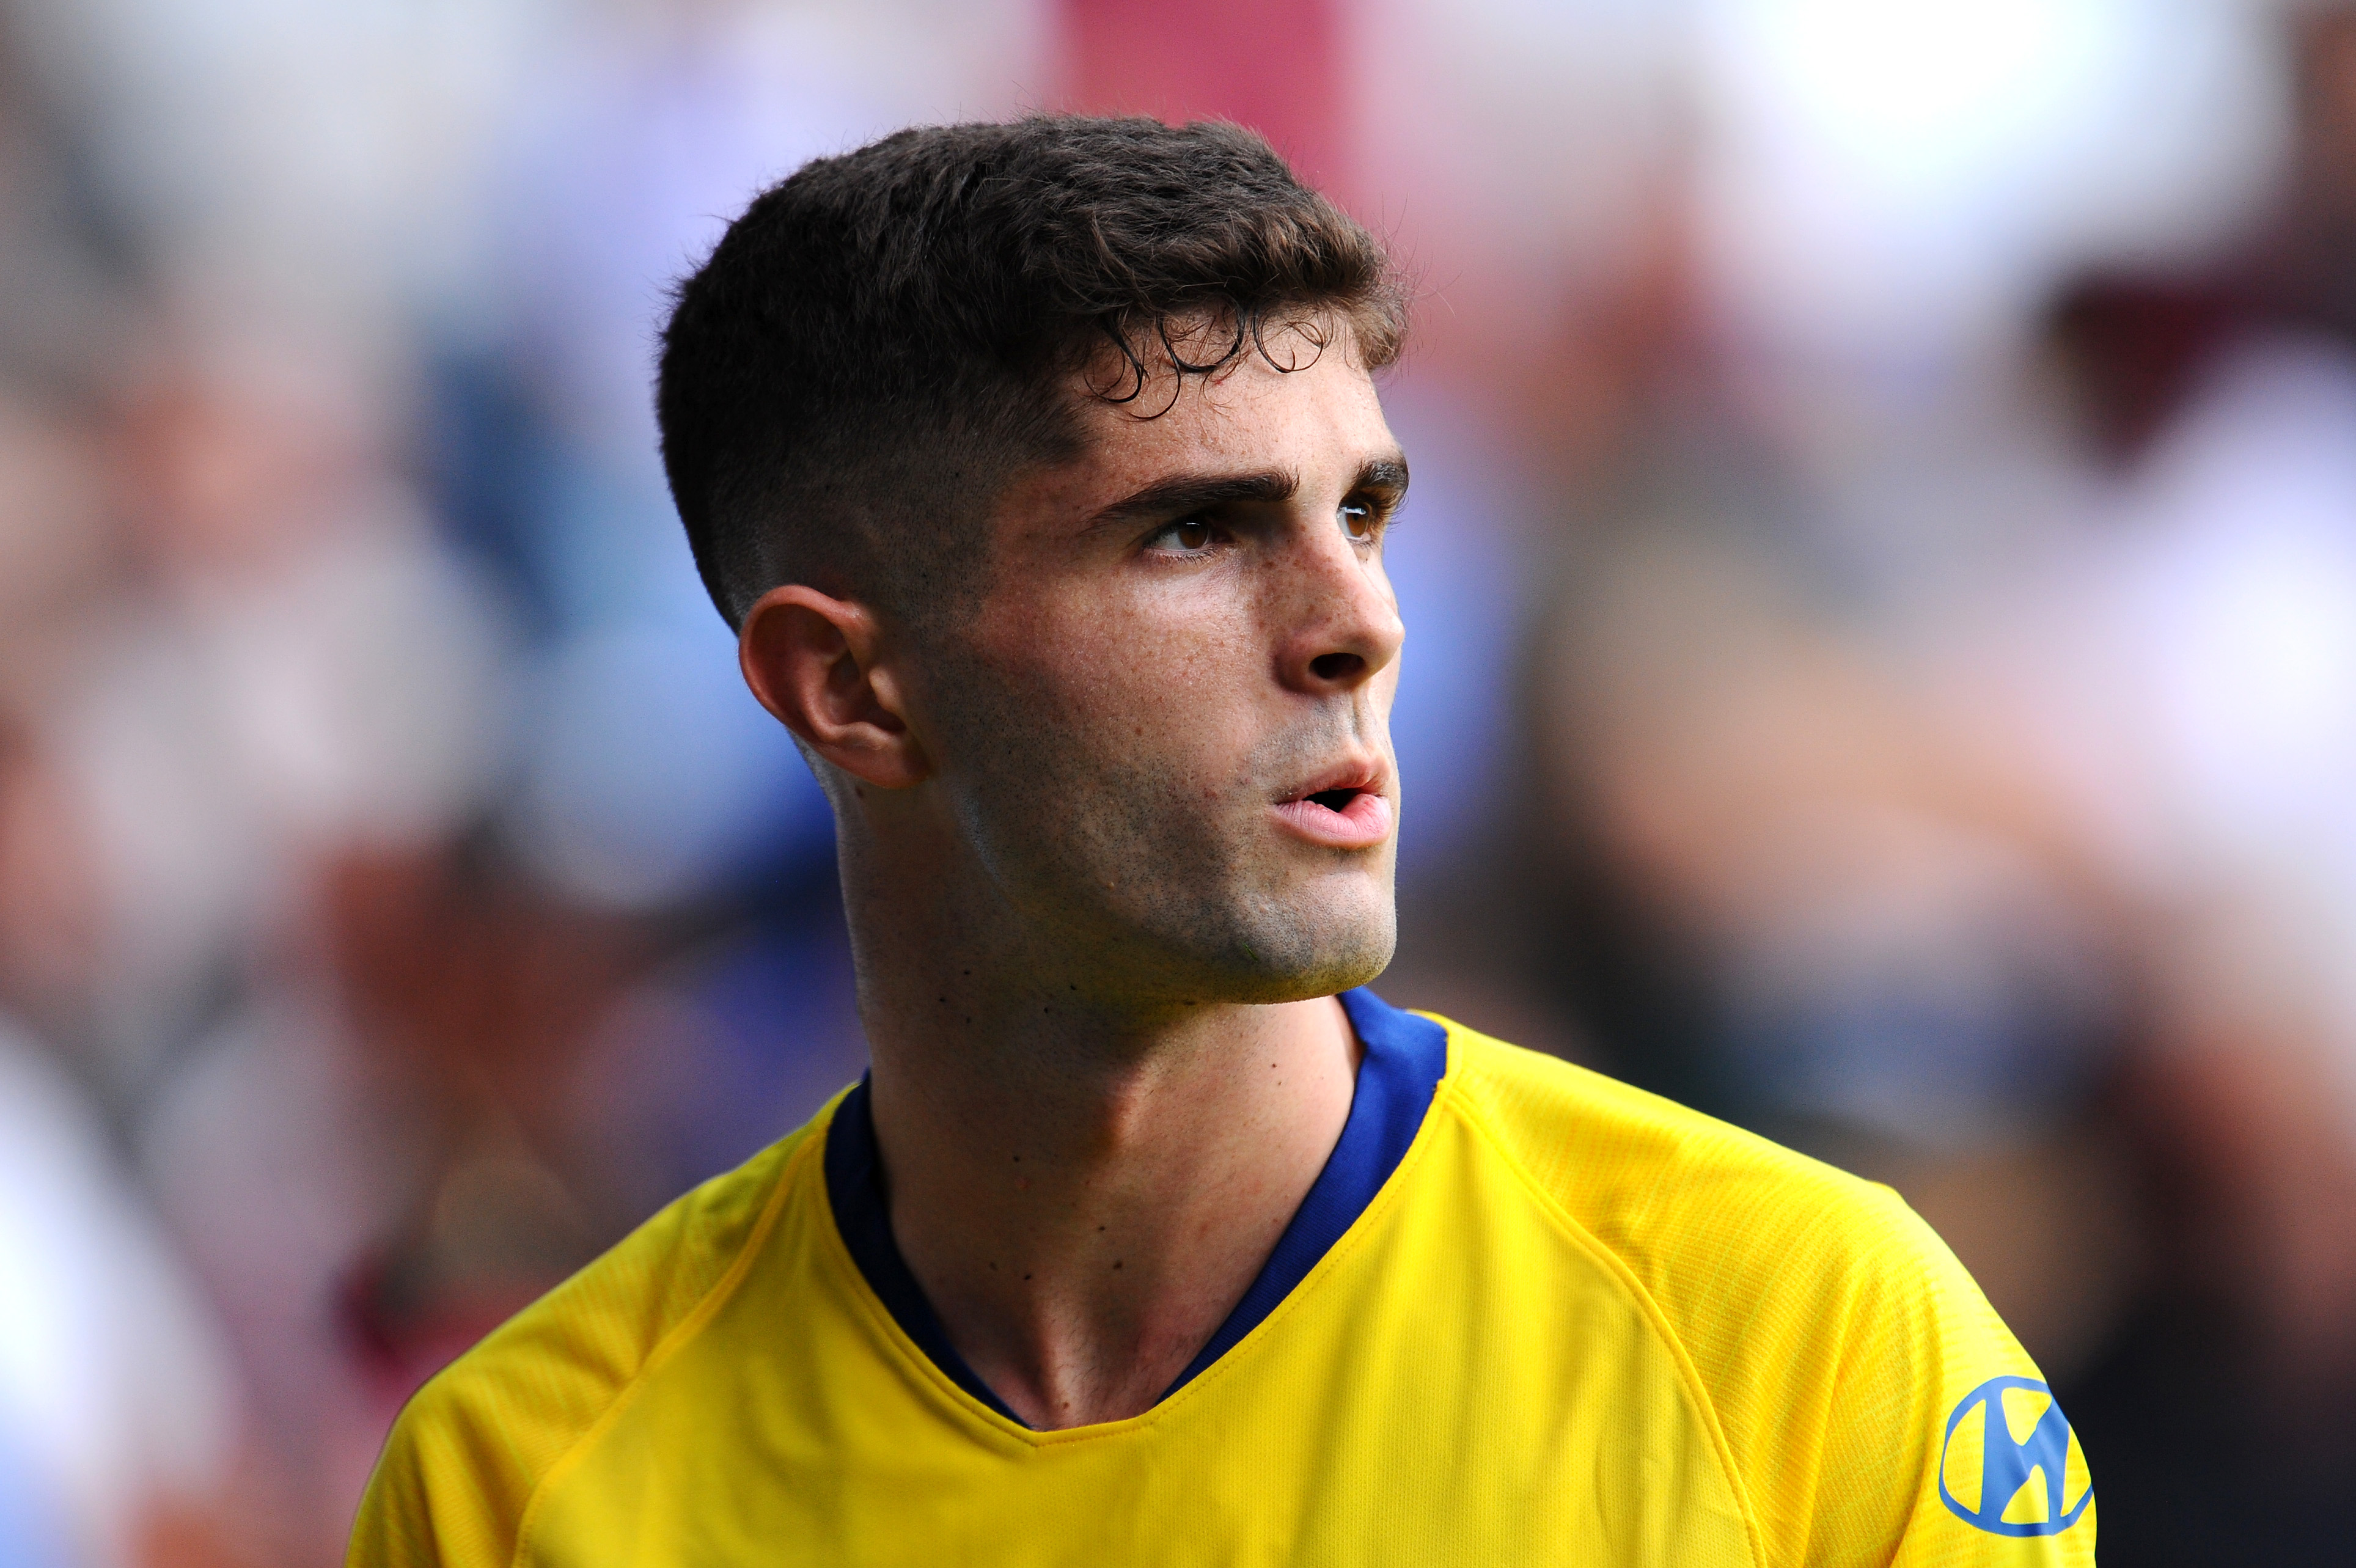 Christian Pulisic : View the player profile of chelsea midfielder